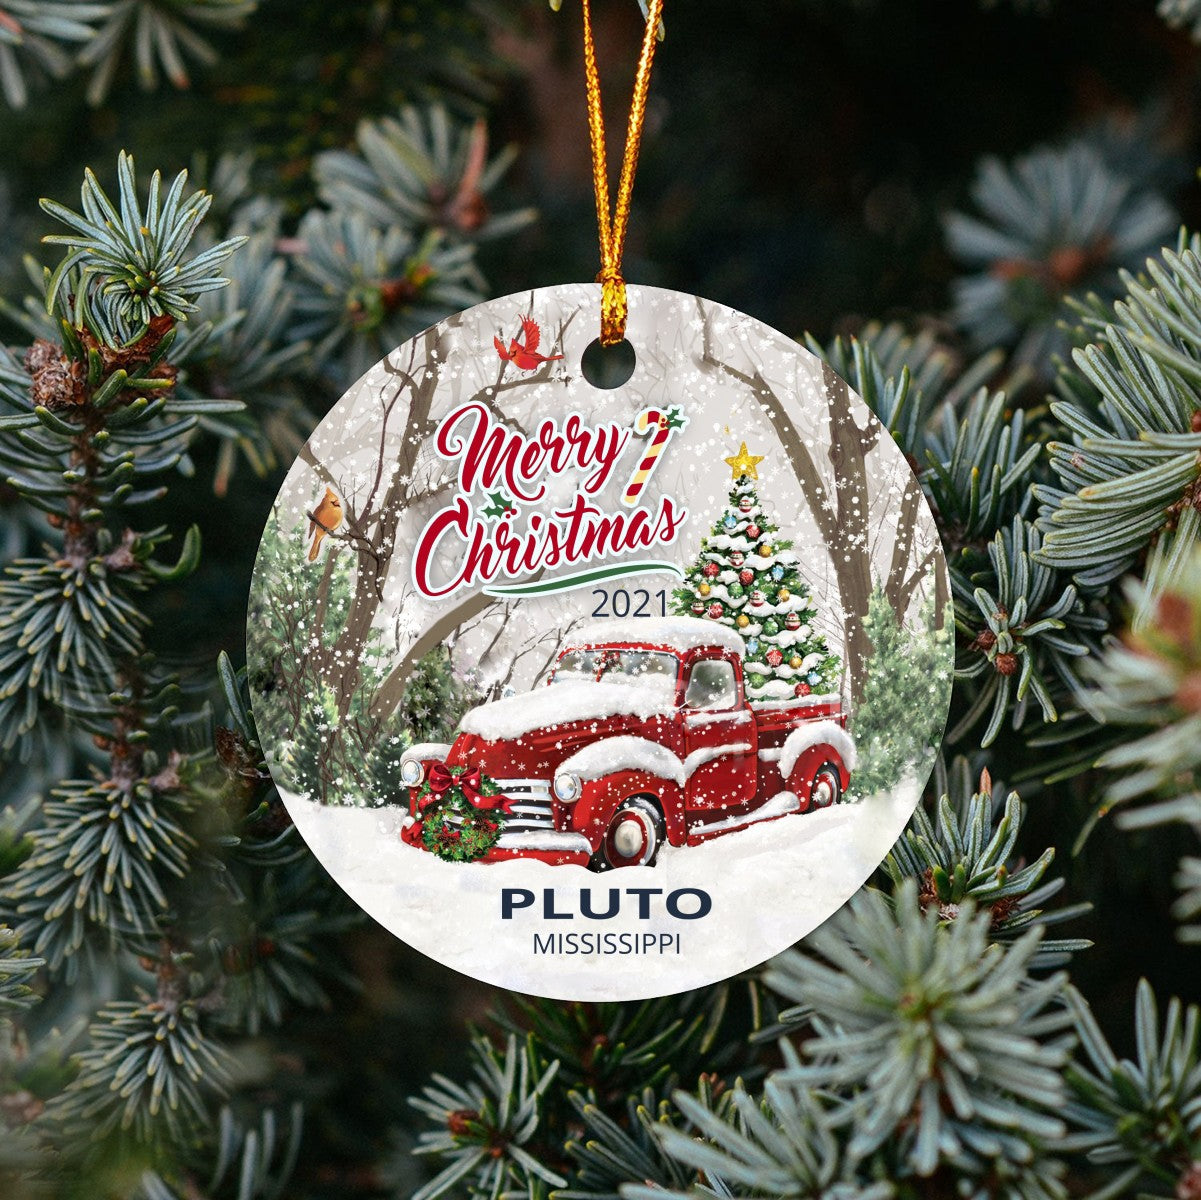 Christmas Tree Ornaments Pluto - Ornament With Name City, State Pluto Mississippi MS Ornament - Red Truck Xmas Ornaments 3'' Plastic Gift For Family, Friend And Housewarming